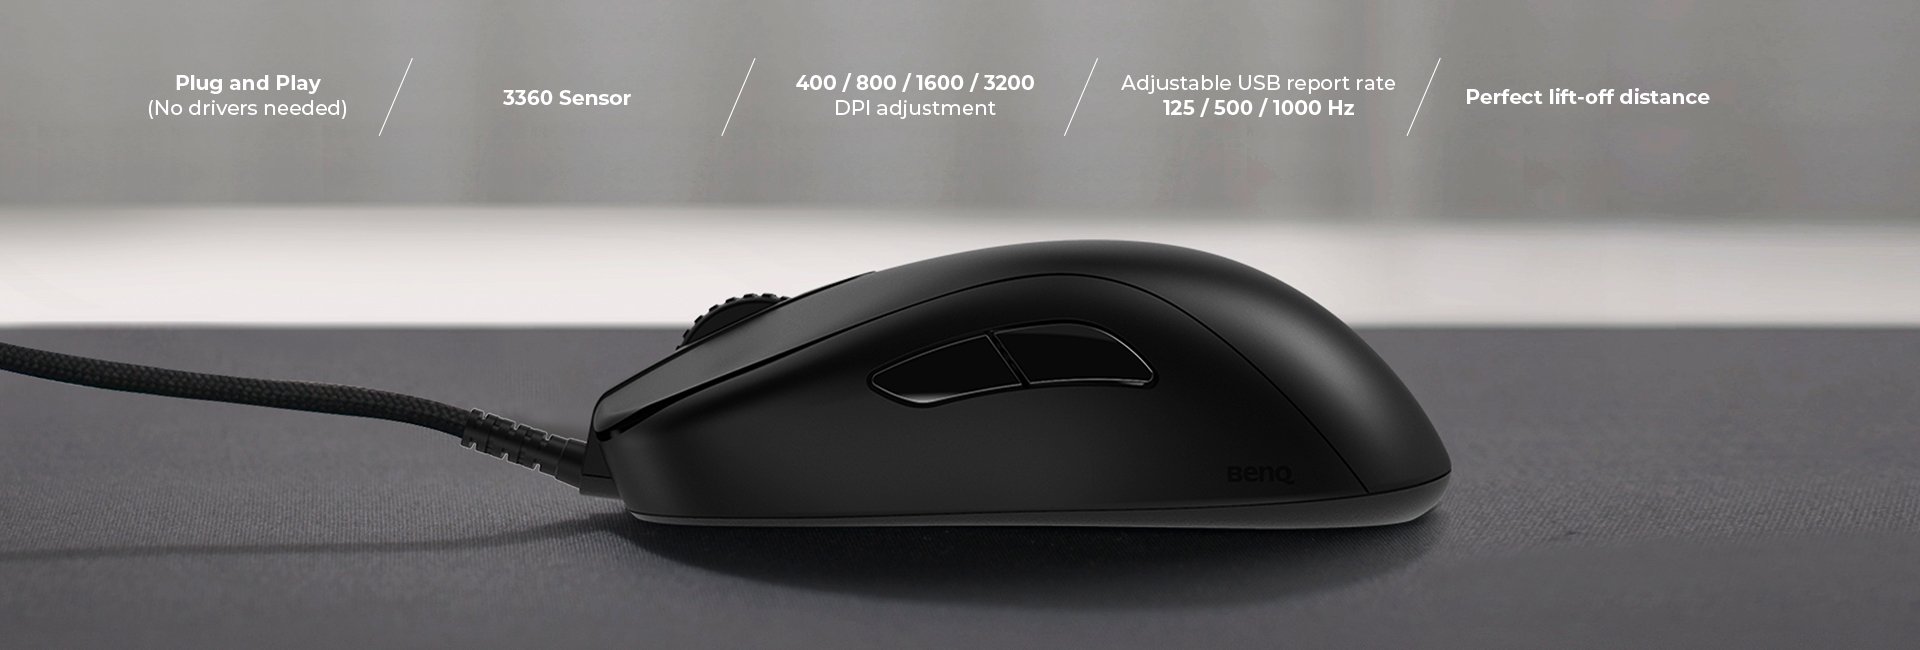 zowie-esports-gaming-mouse-s1-c-plug-and-play-3360-sensor-dpi-adjustment-adjustable-usb-report-rate-perfect-lift-off-distance